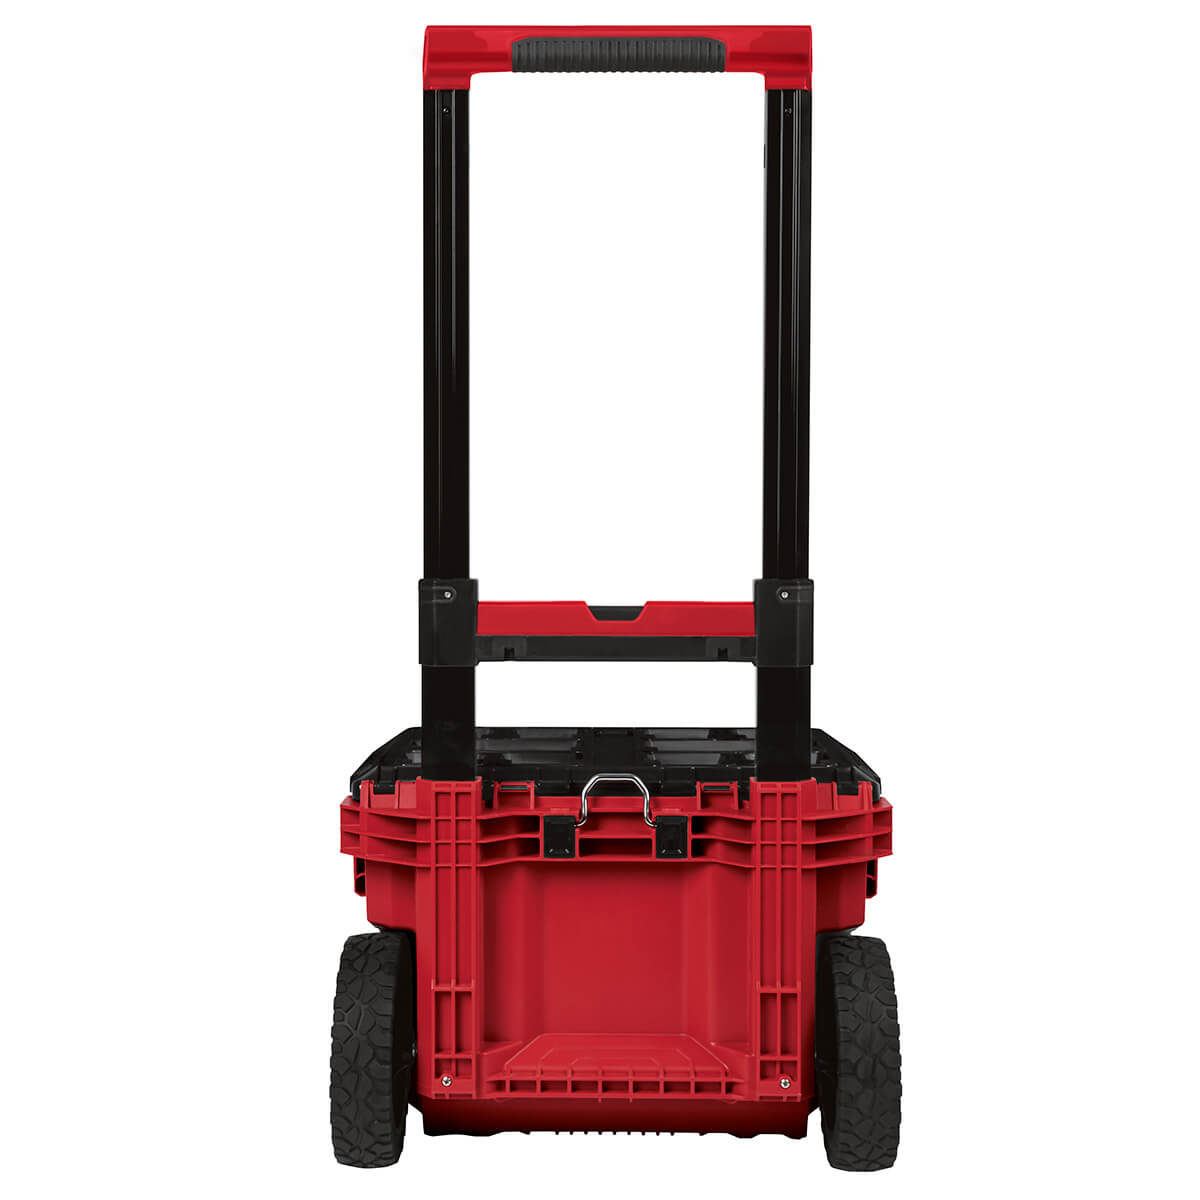 Milwaukee PACKOUT Rolling Storage - wise-line-tools